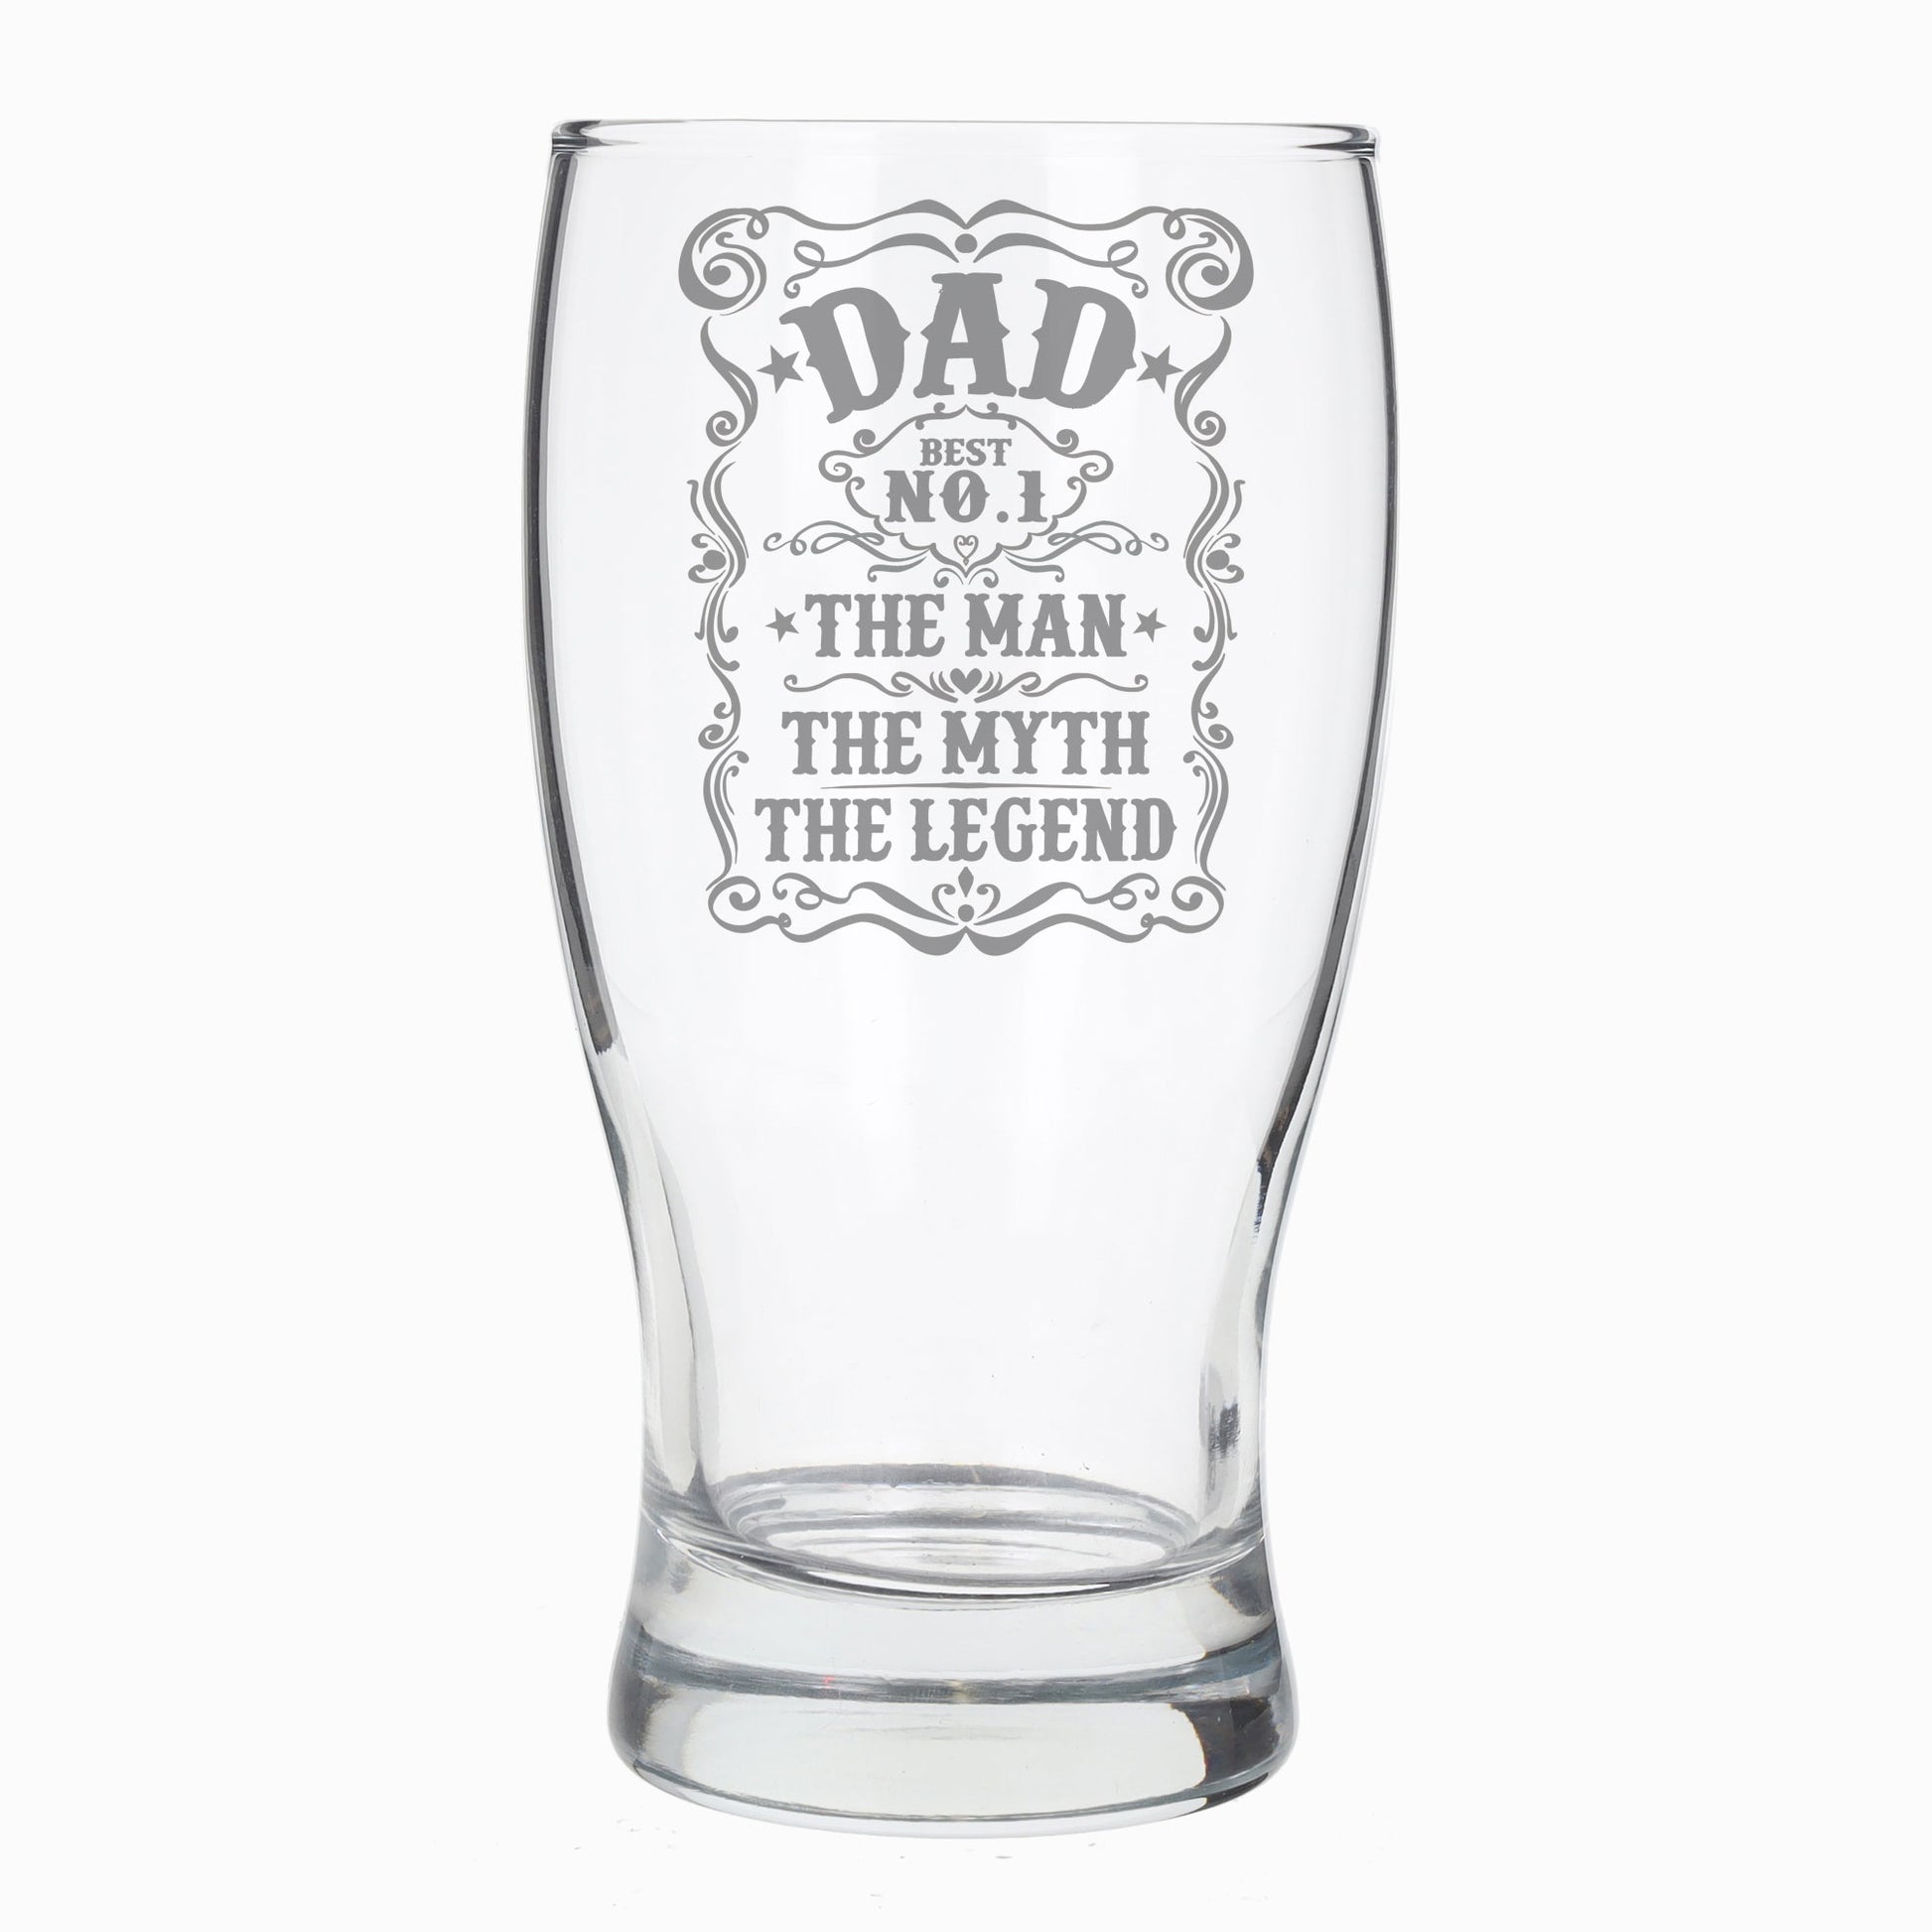 Dad The Man The Myth The Legend Engraved Beer Pint Glass and/or Coaster Set  - Always Looking Good - Beer Glass Only  